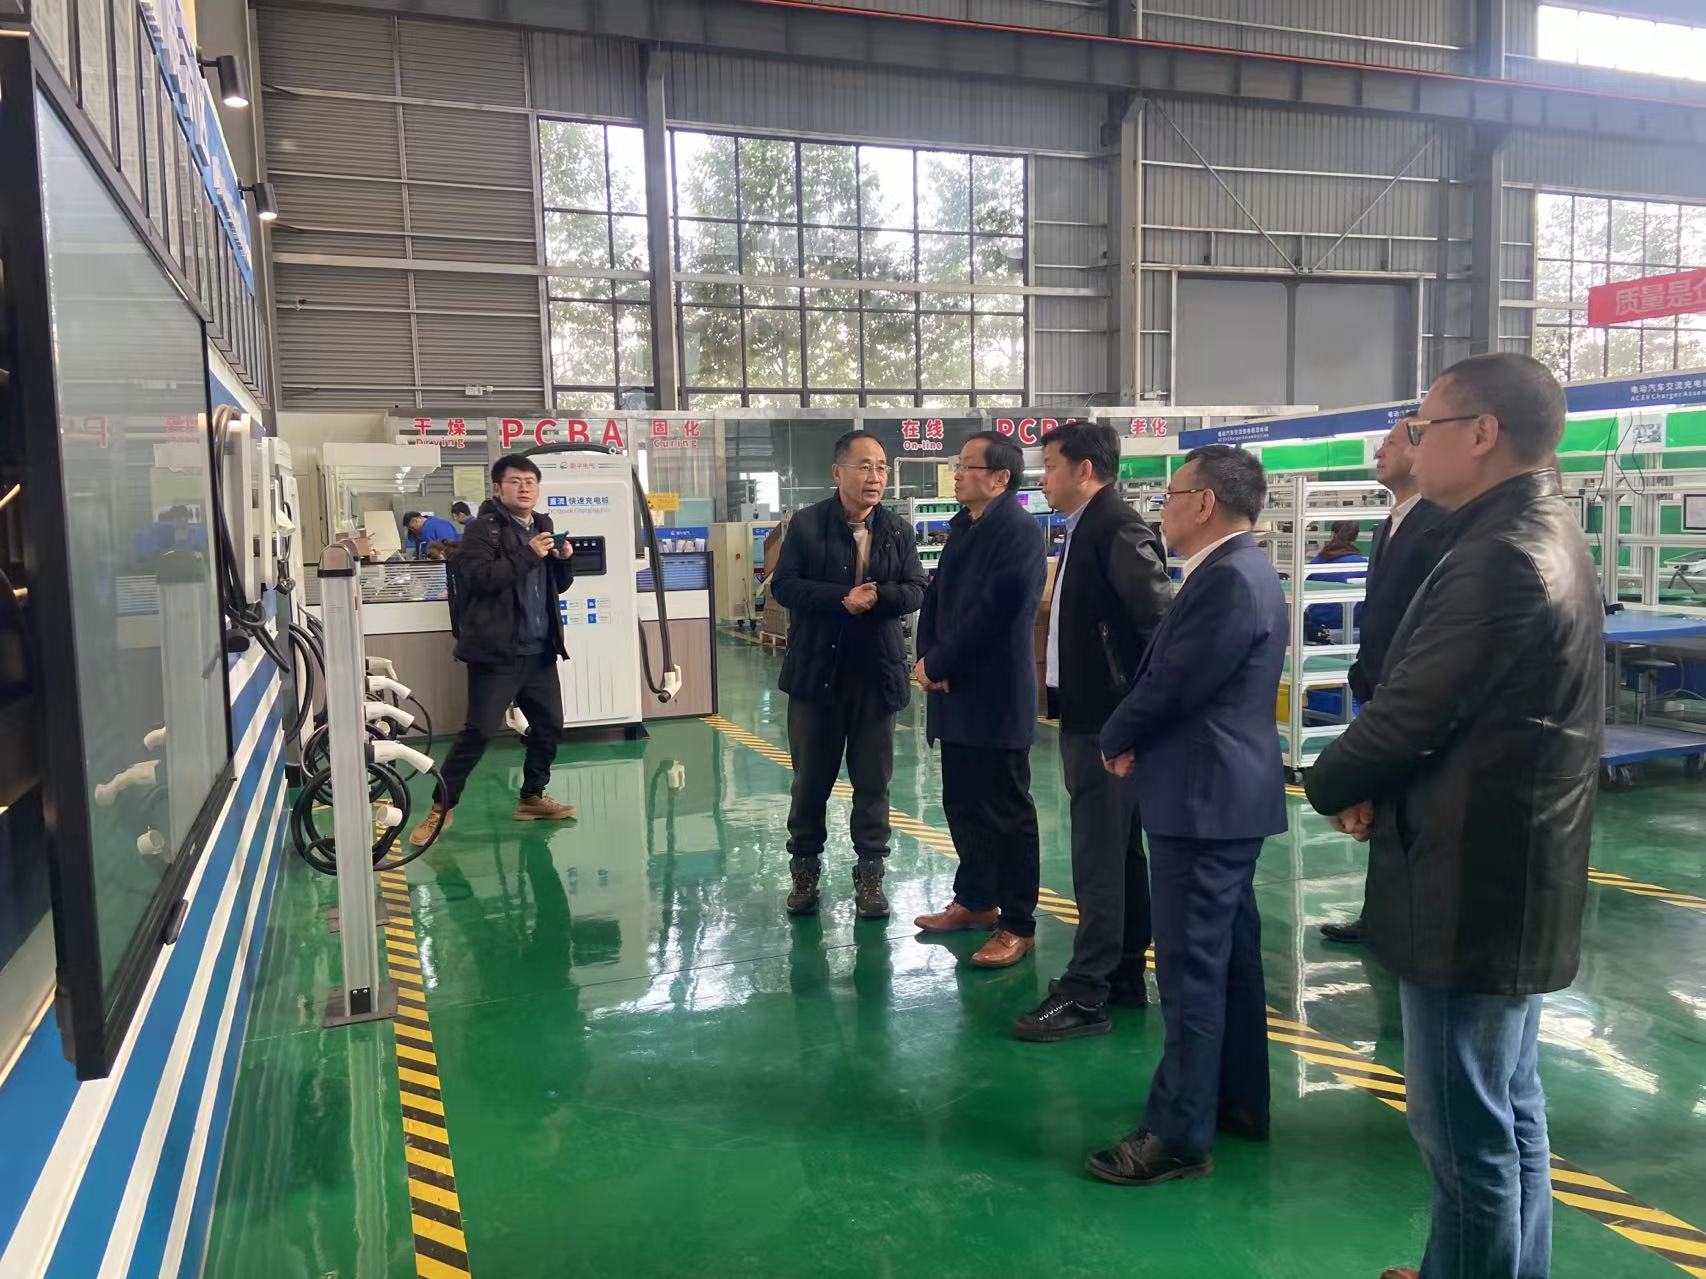 Party Secretary and Chairman of Shu Road Service Group, visited Weeyu’Factory